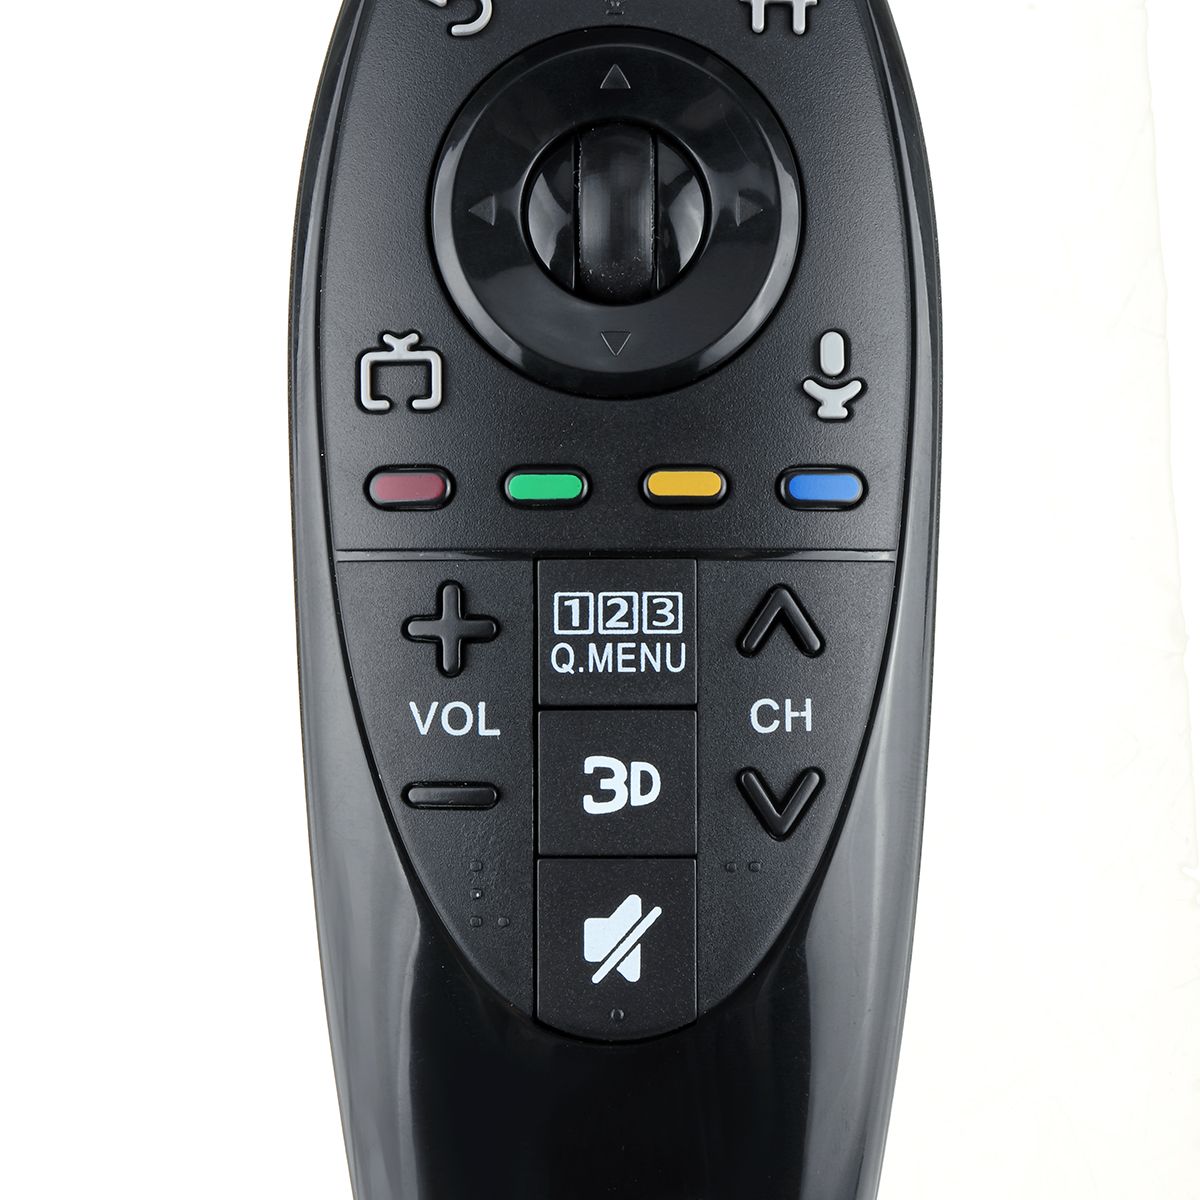 Replacement-Remote-Control-Controller-for-LG-3D-Smart-HD-TV-AN-MR500G-AN-MR500-MBM63935937-1627104